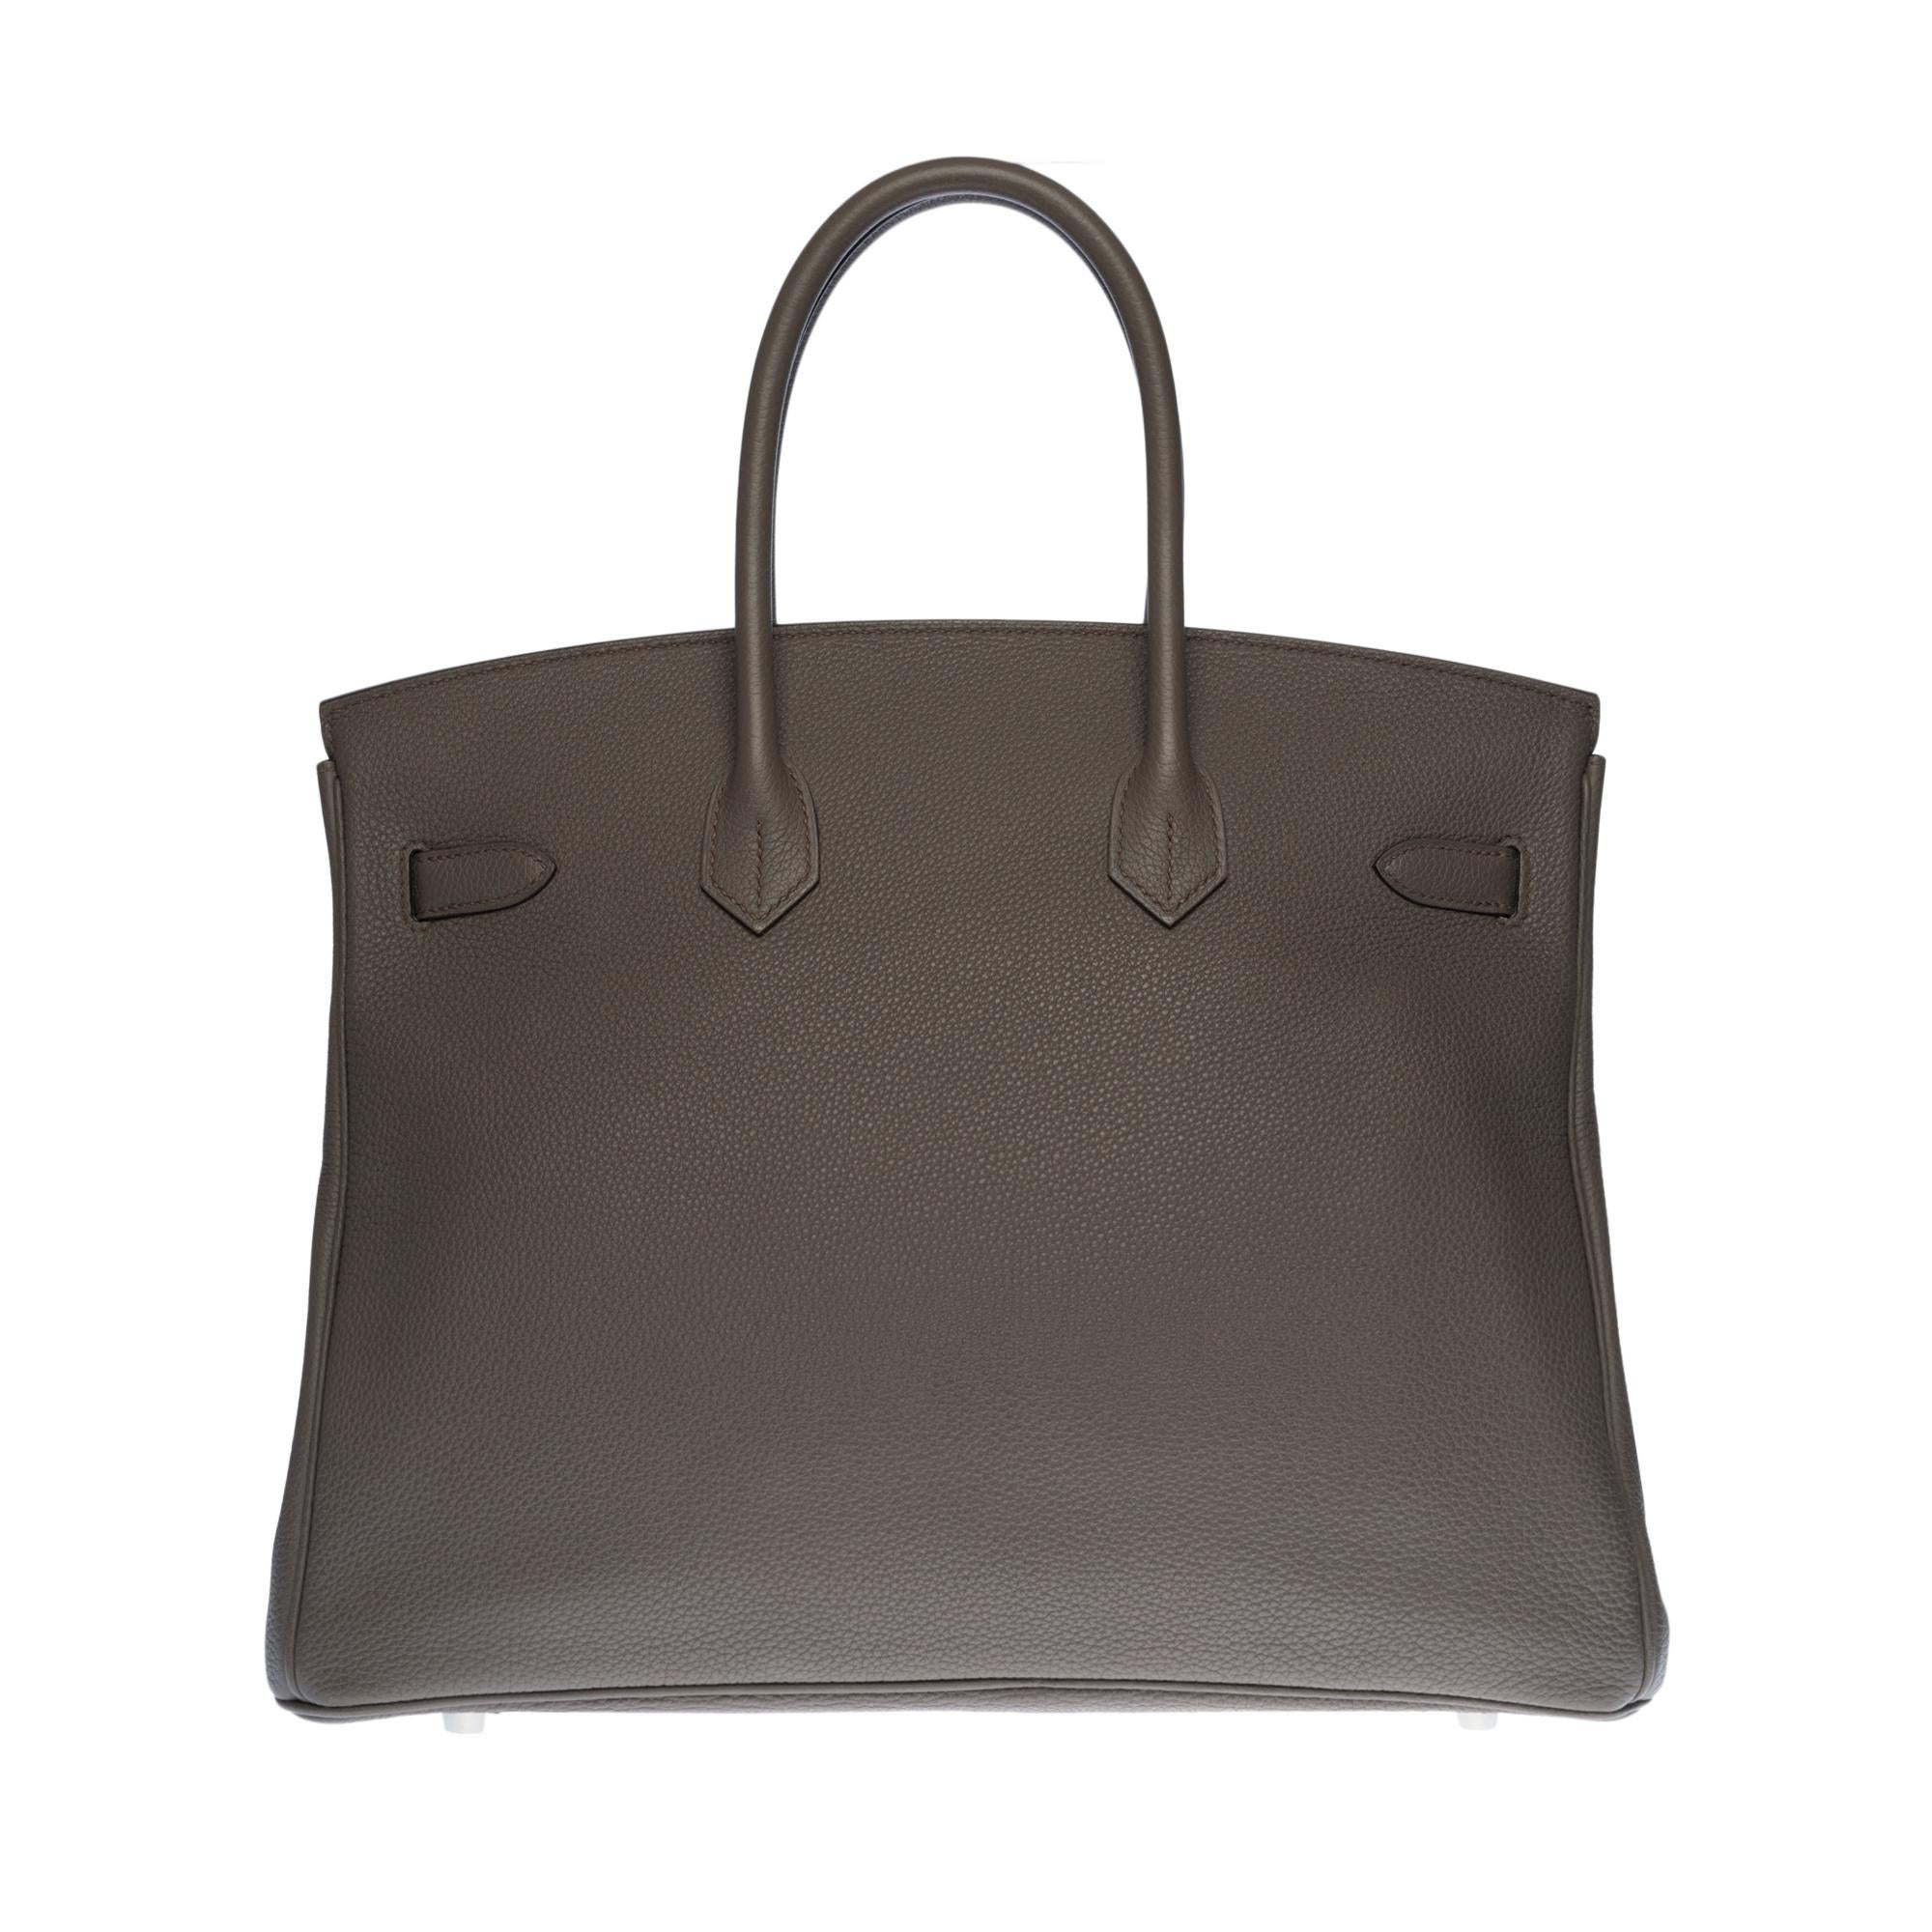 Beautiful Hermes Birkin 35 cm handbag in grey Togo leather Etain, silver metal palladium hardware, double handle in grey leather allowing a hand carried.
Closure by flap.
Lining in grey leather, a zipped pocket, a patch pocket.
Signature: 